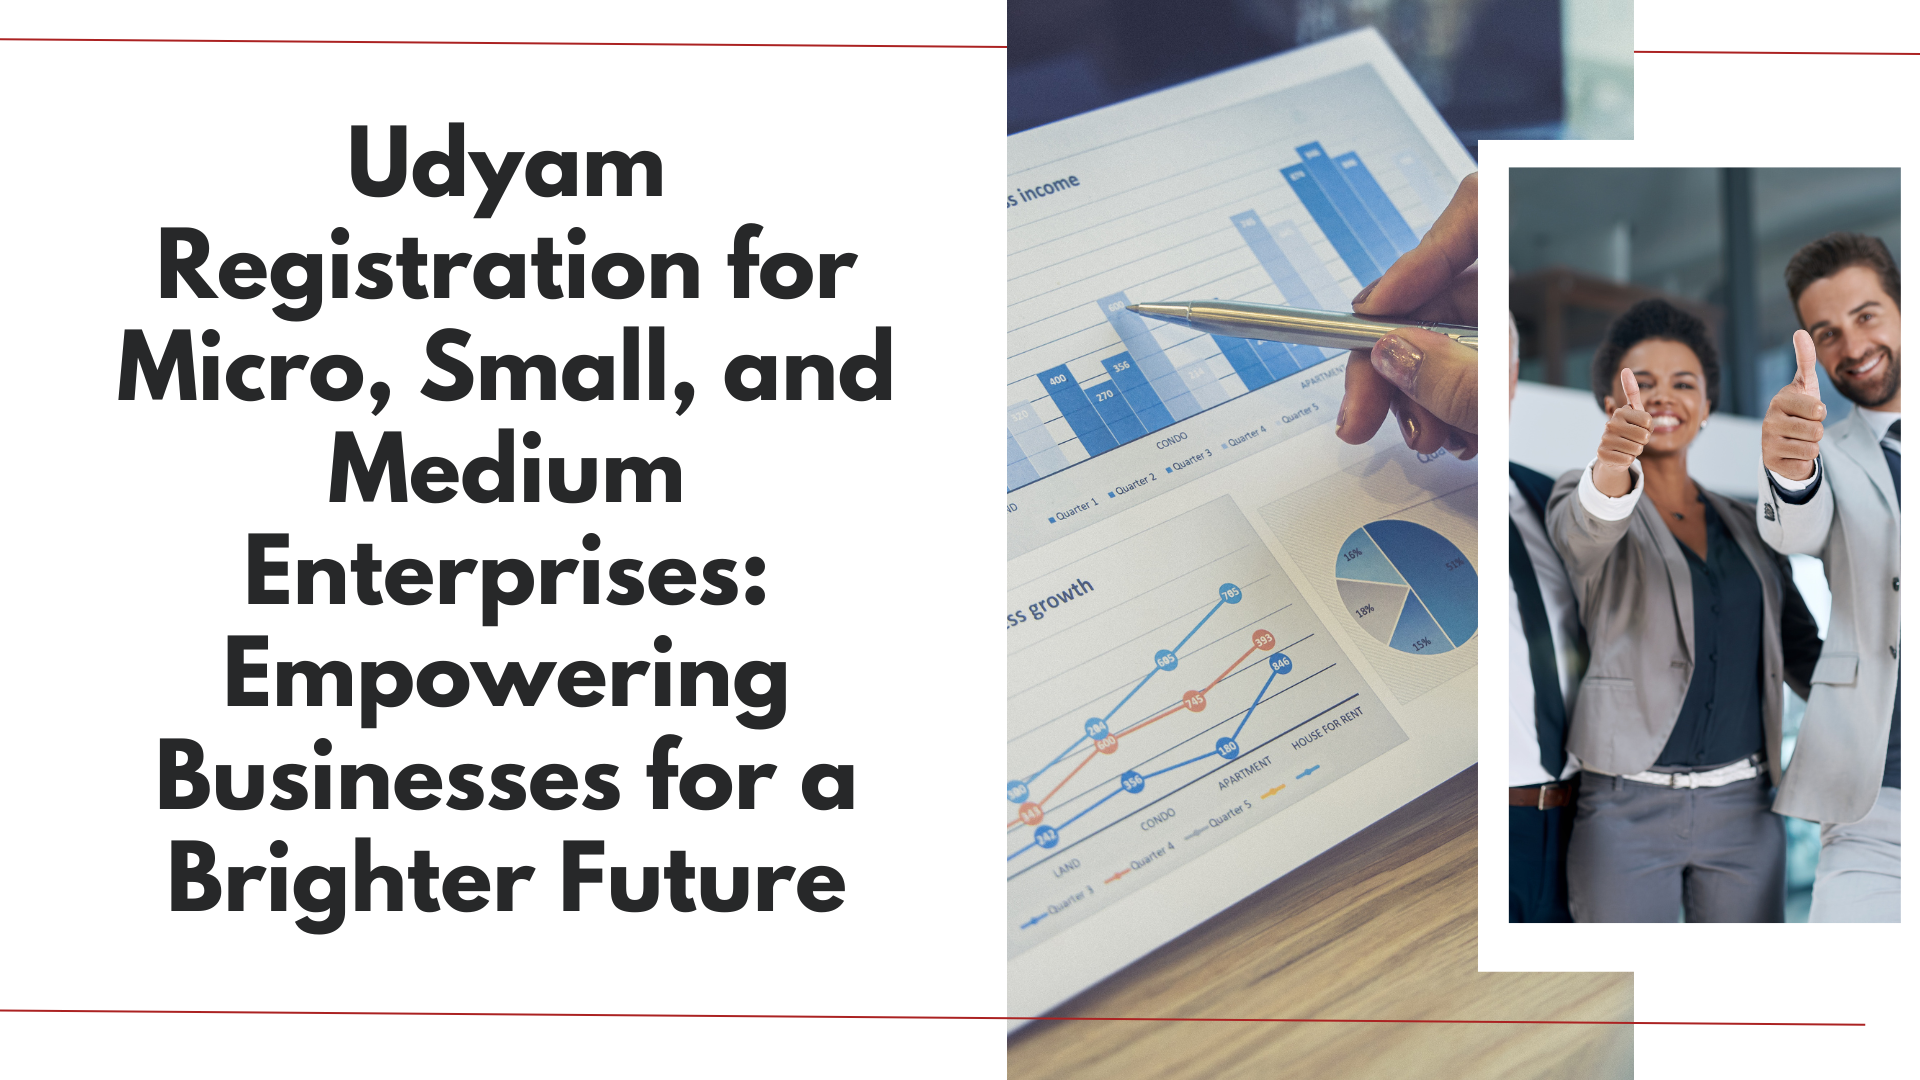 Udyam Registration for Micro, Small, and Medium Enterprises Empowering Businesses for a Brighter Future